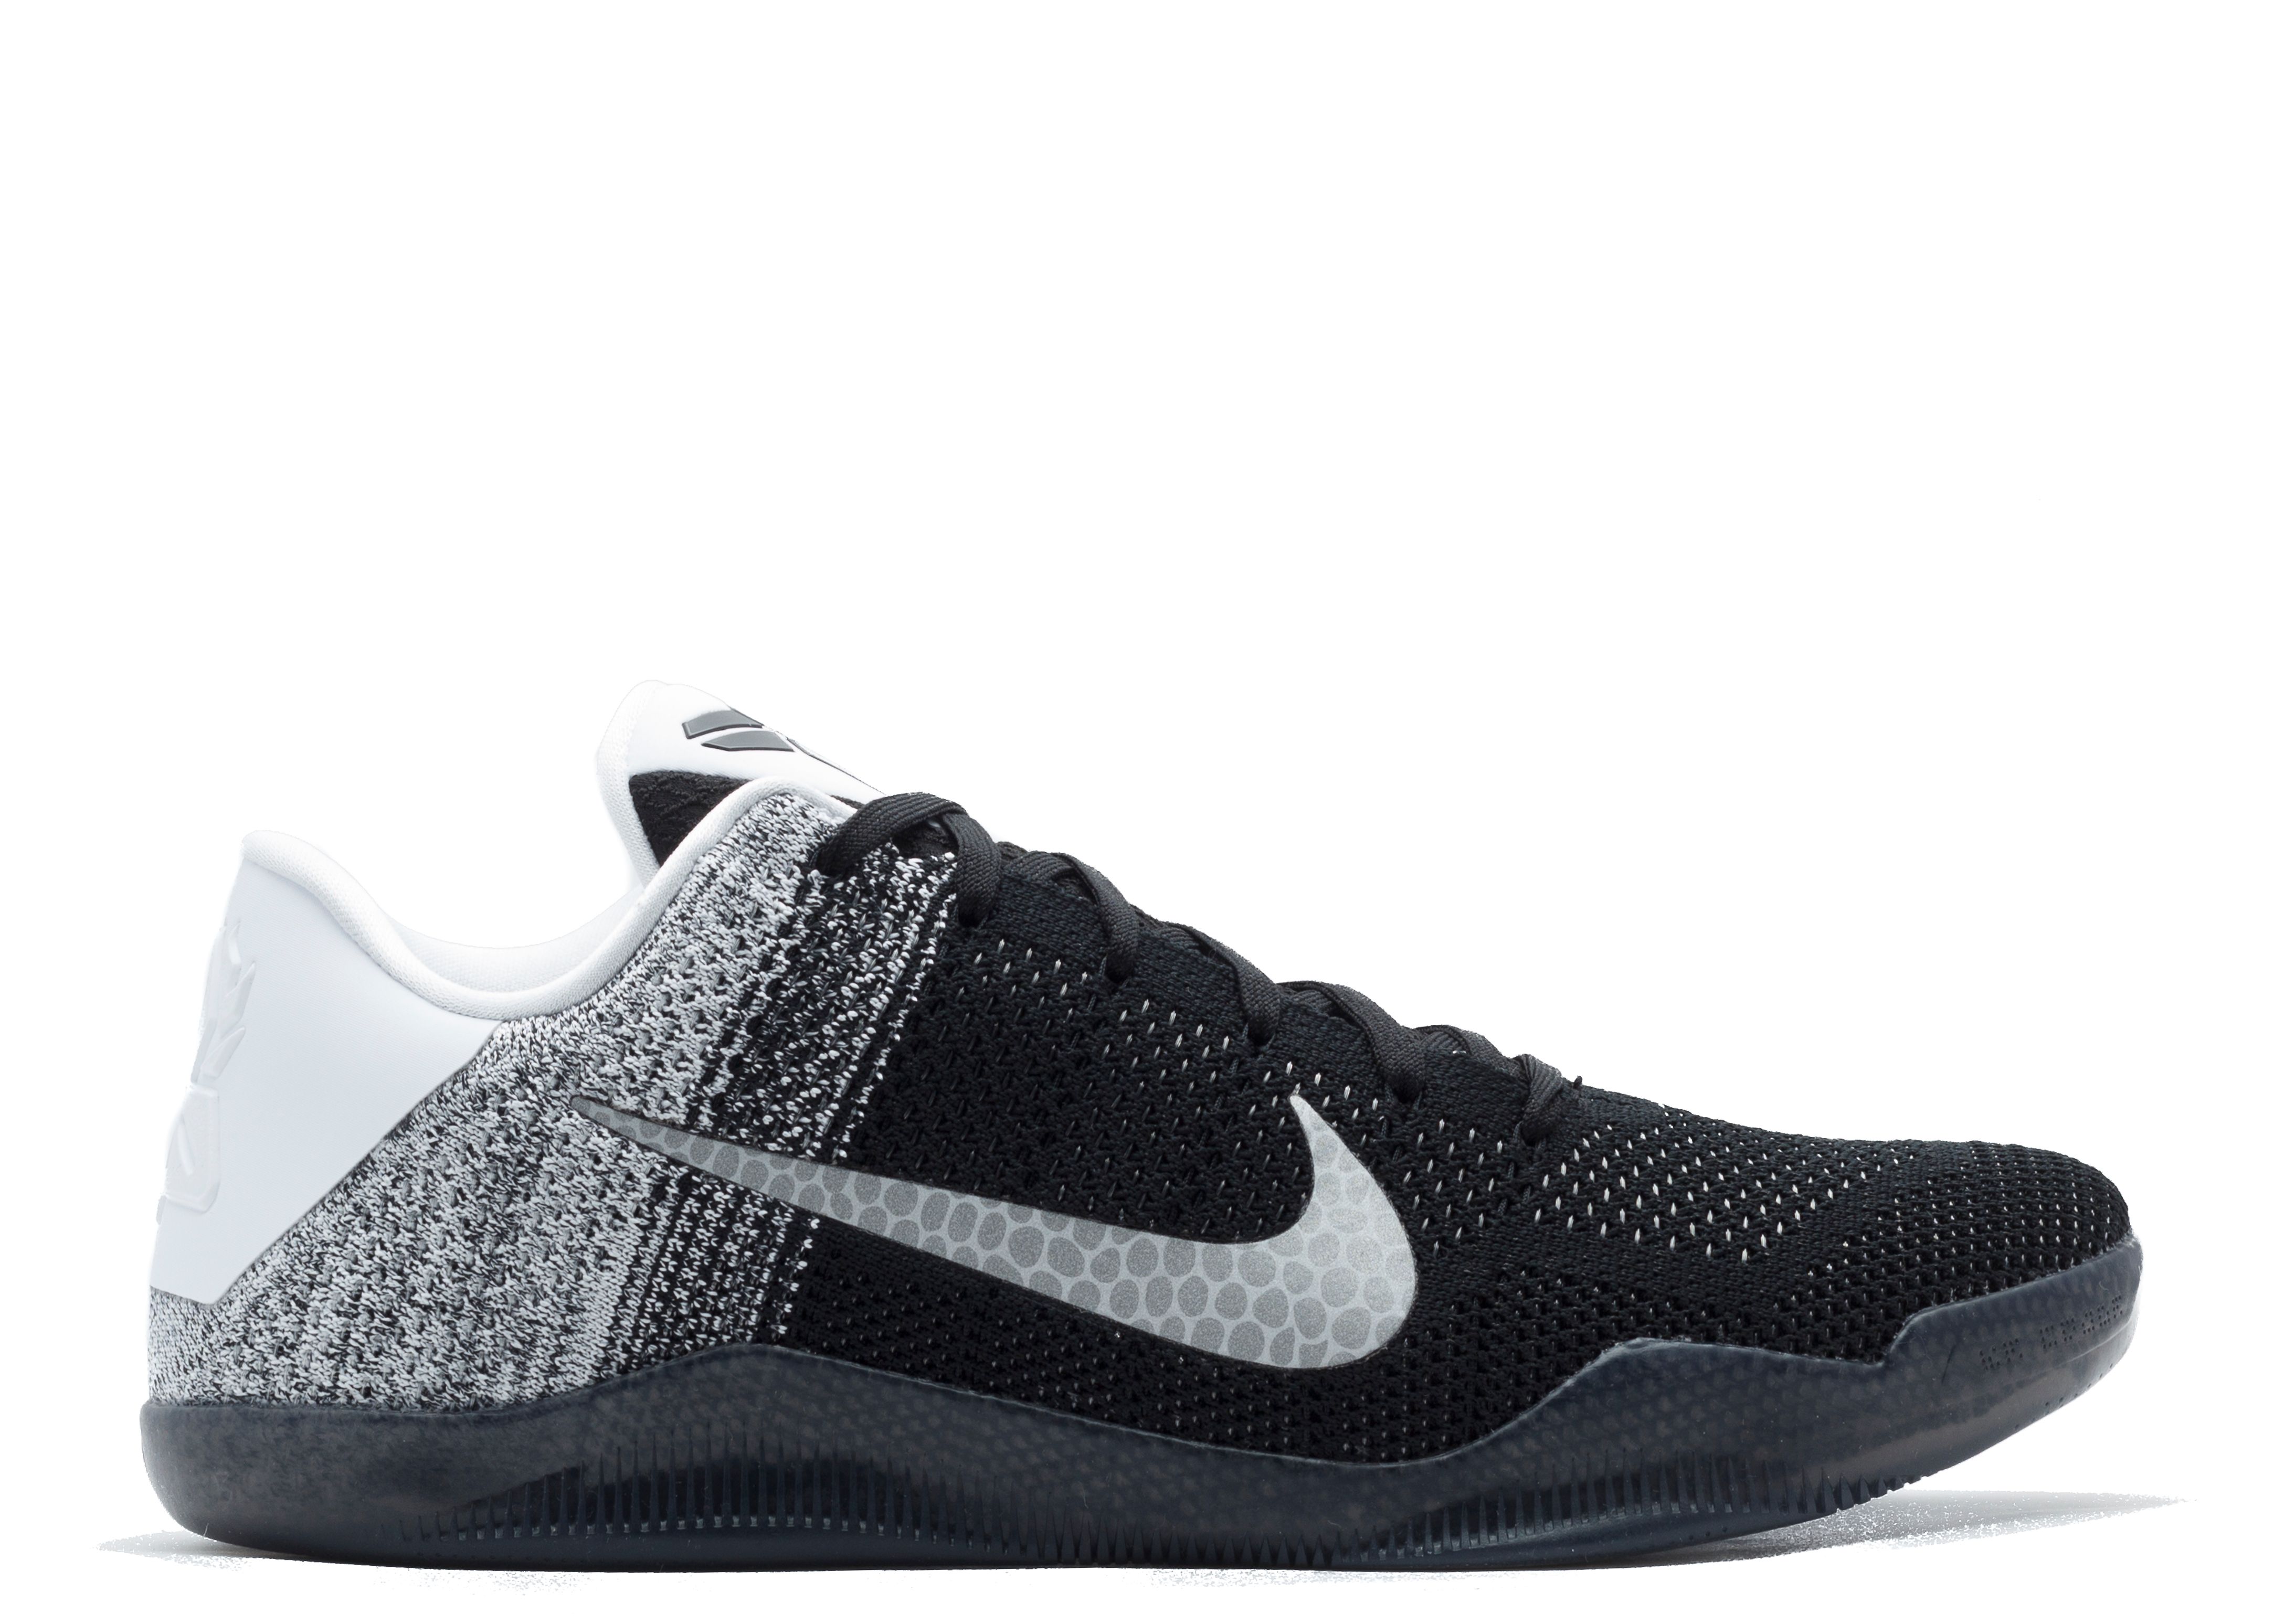 kobes shoes black and white